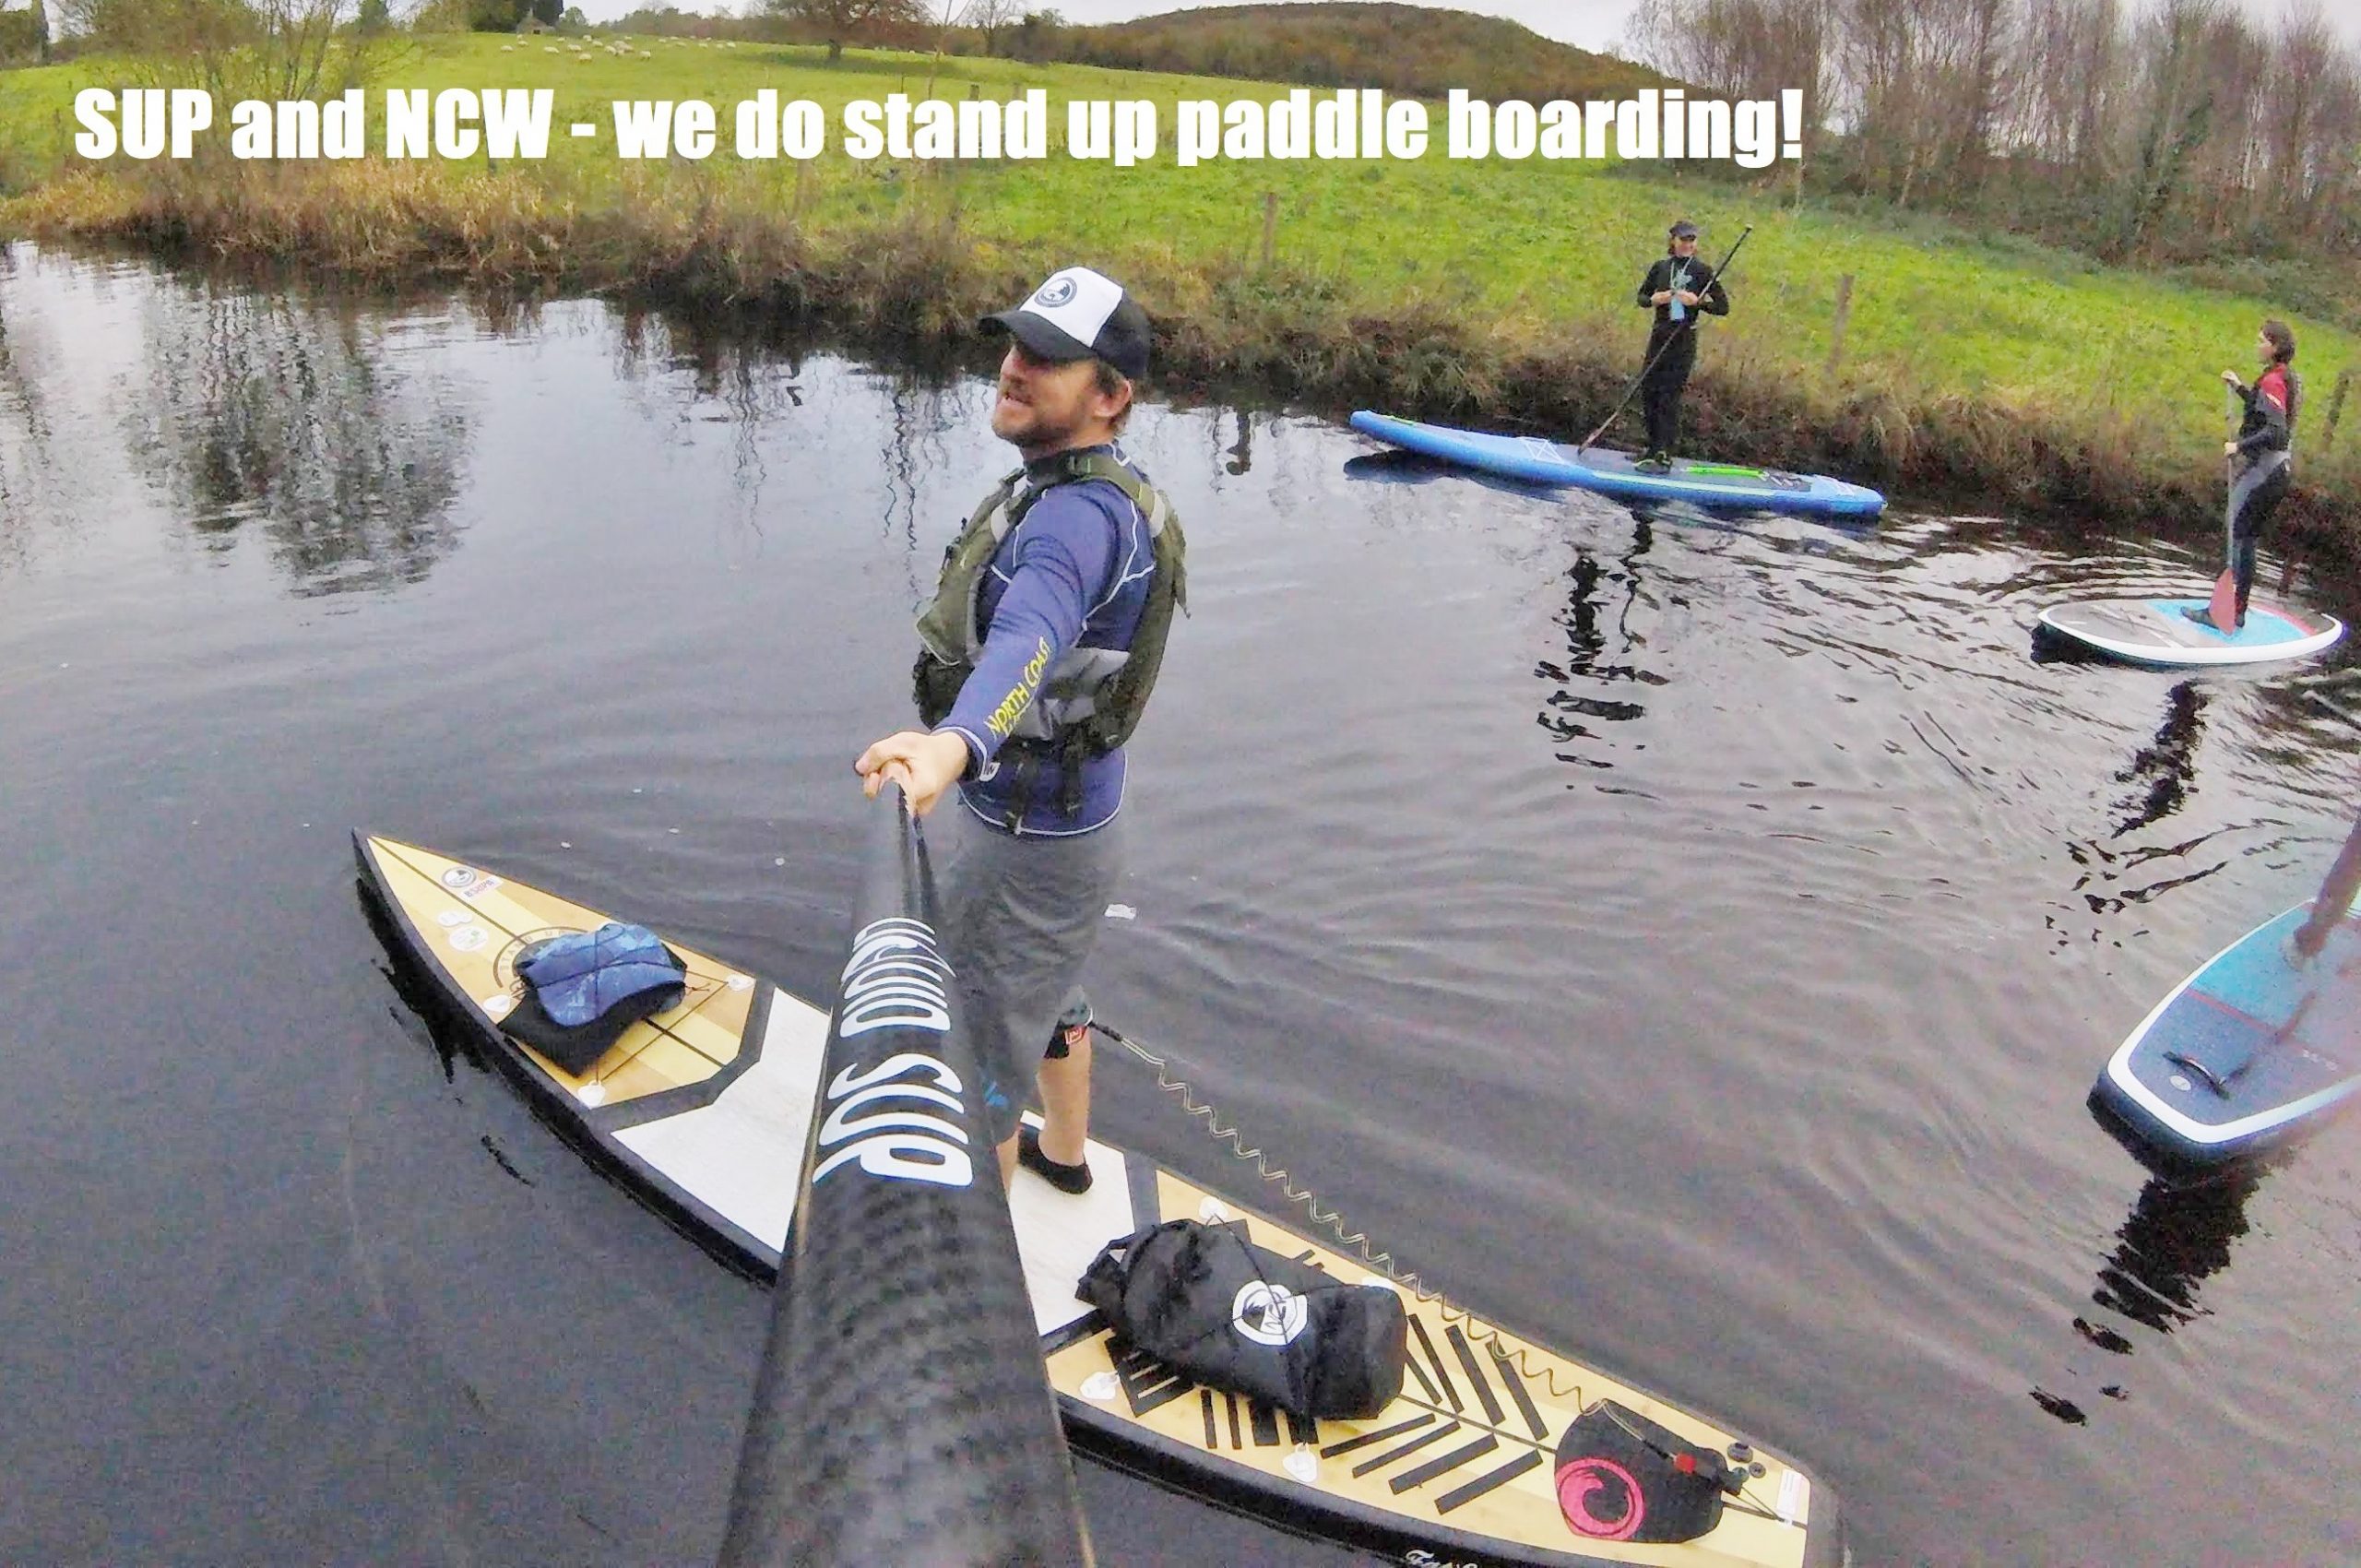 SUP and NCW - we do stand up paddle boarding!